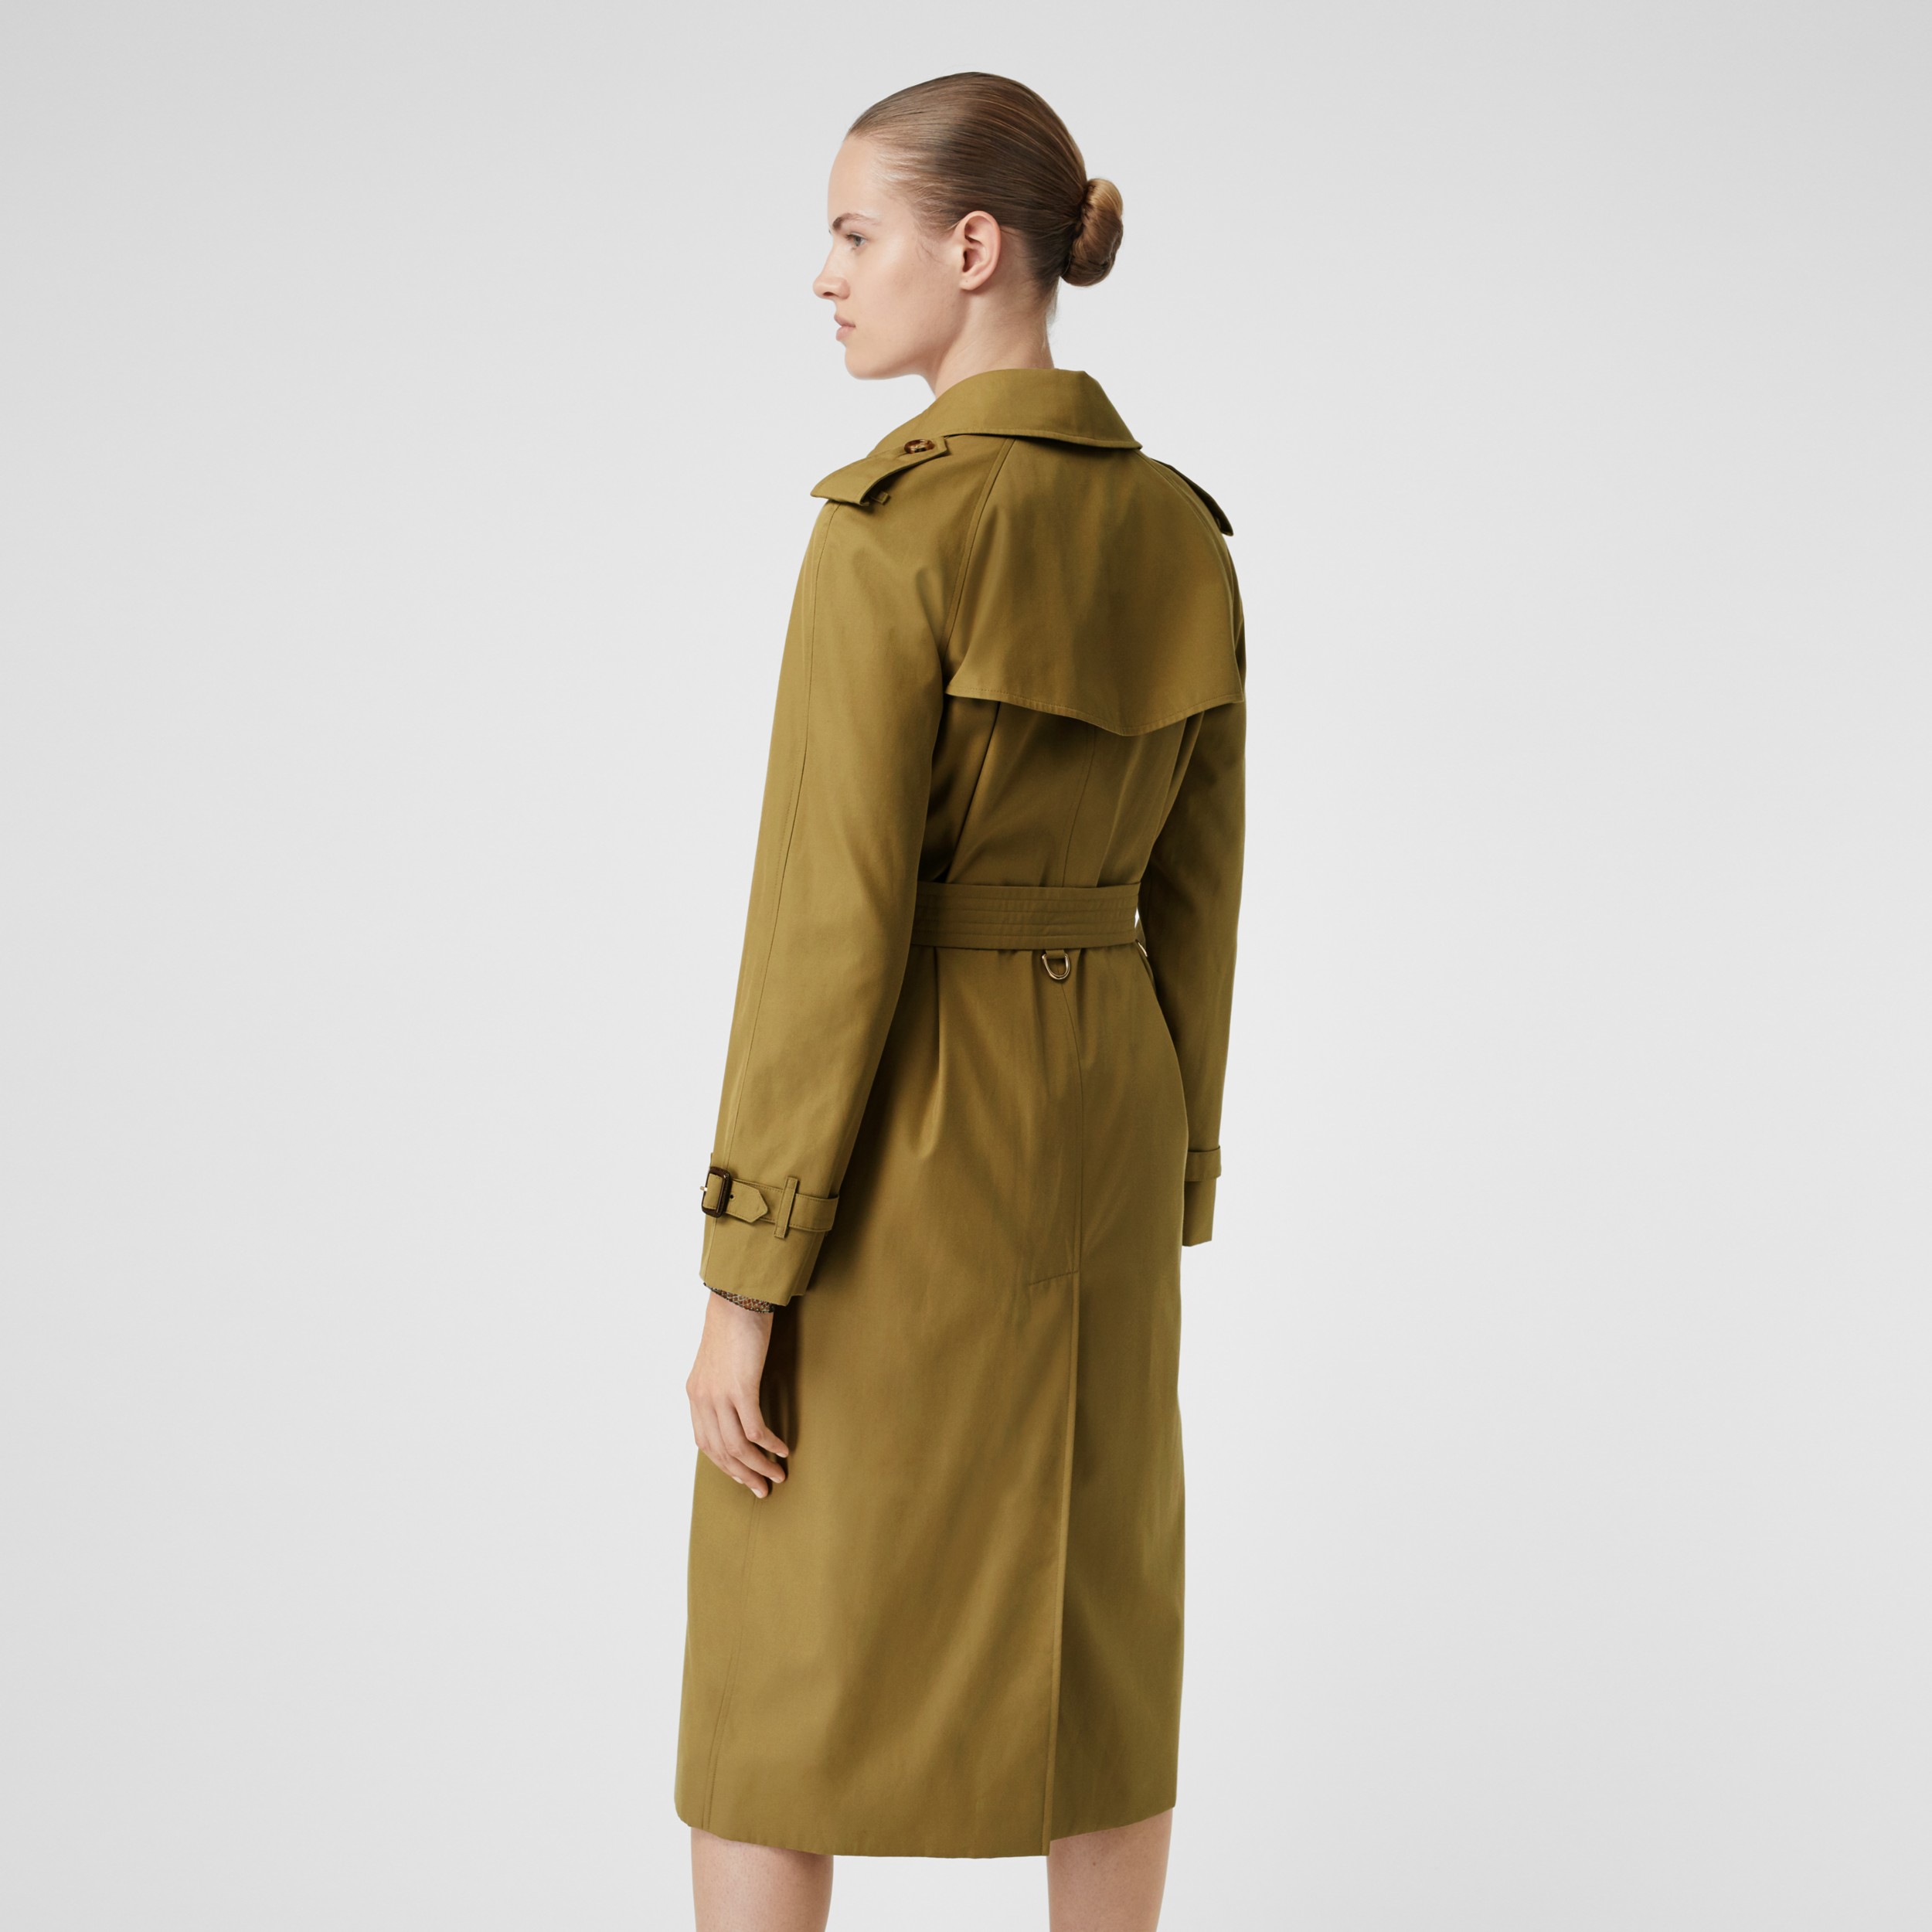 The Waterloo Trench Coat in Rich Olive - Women | Burberry